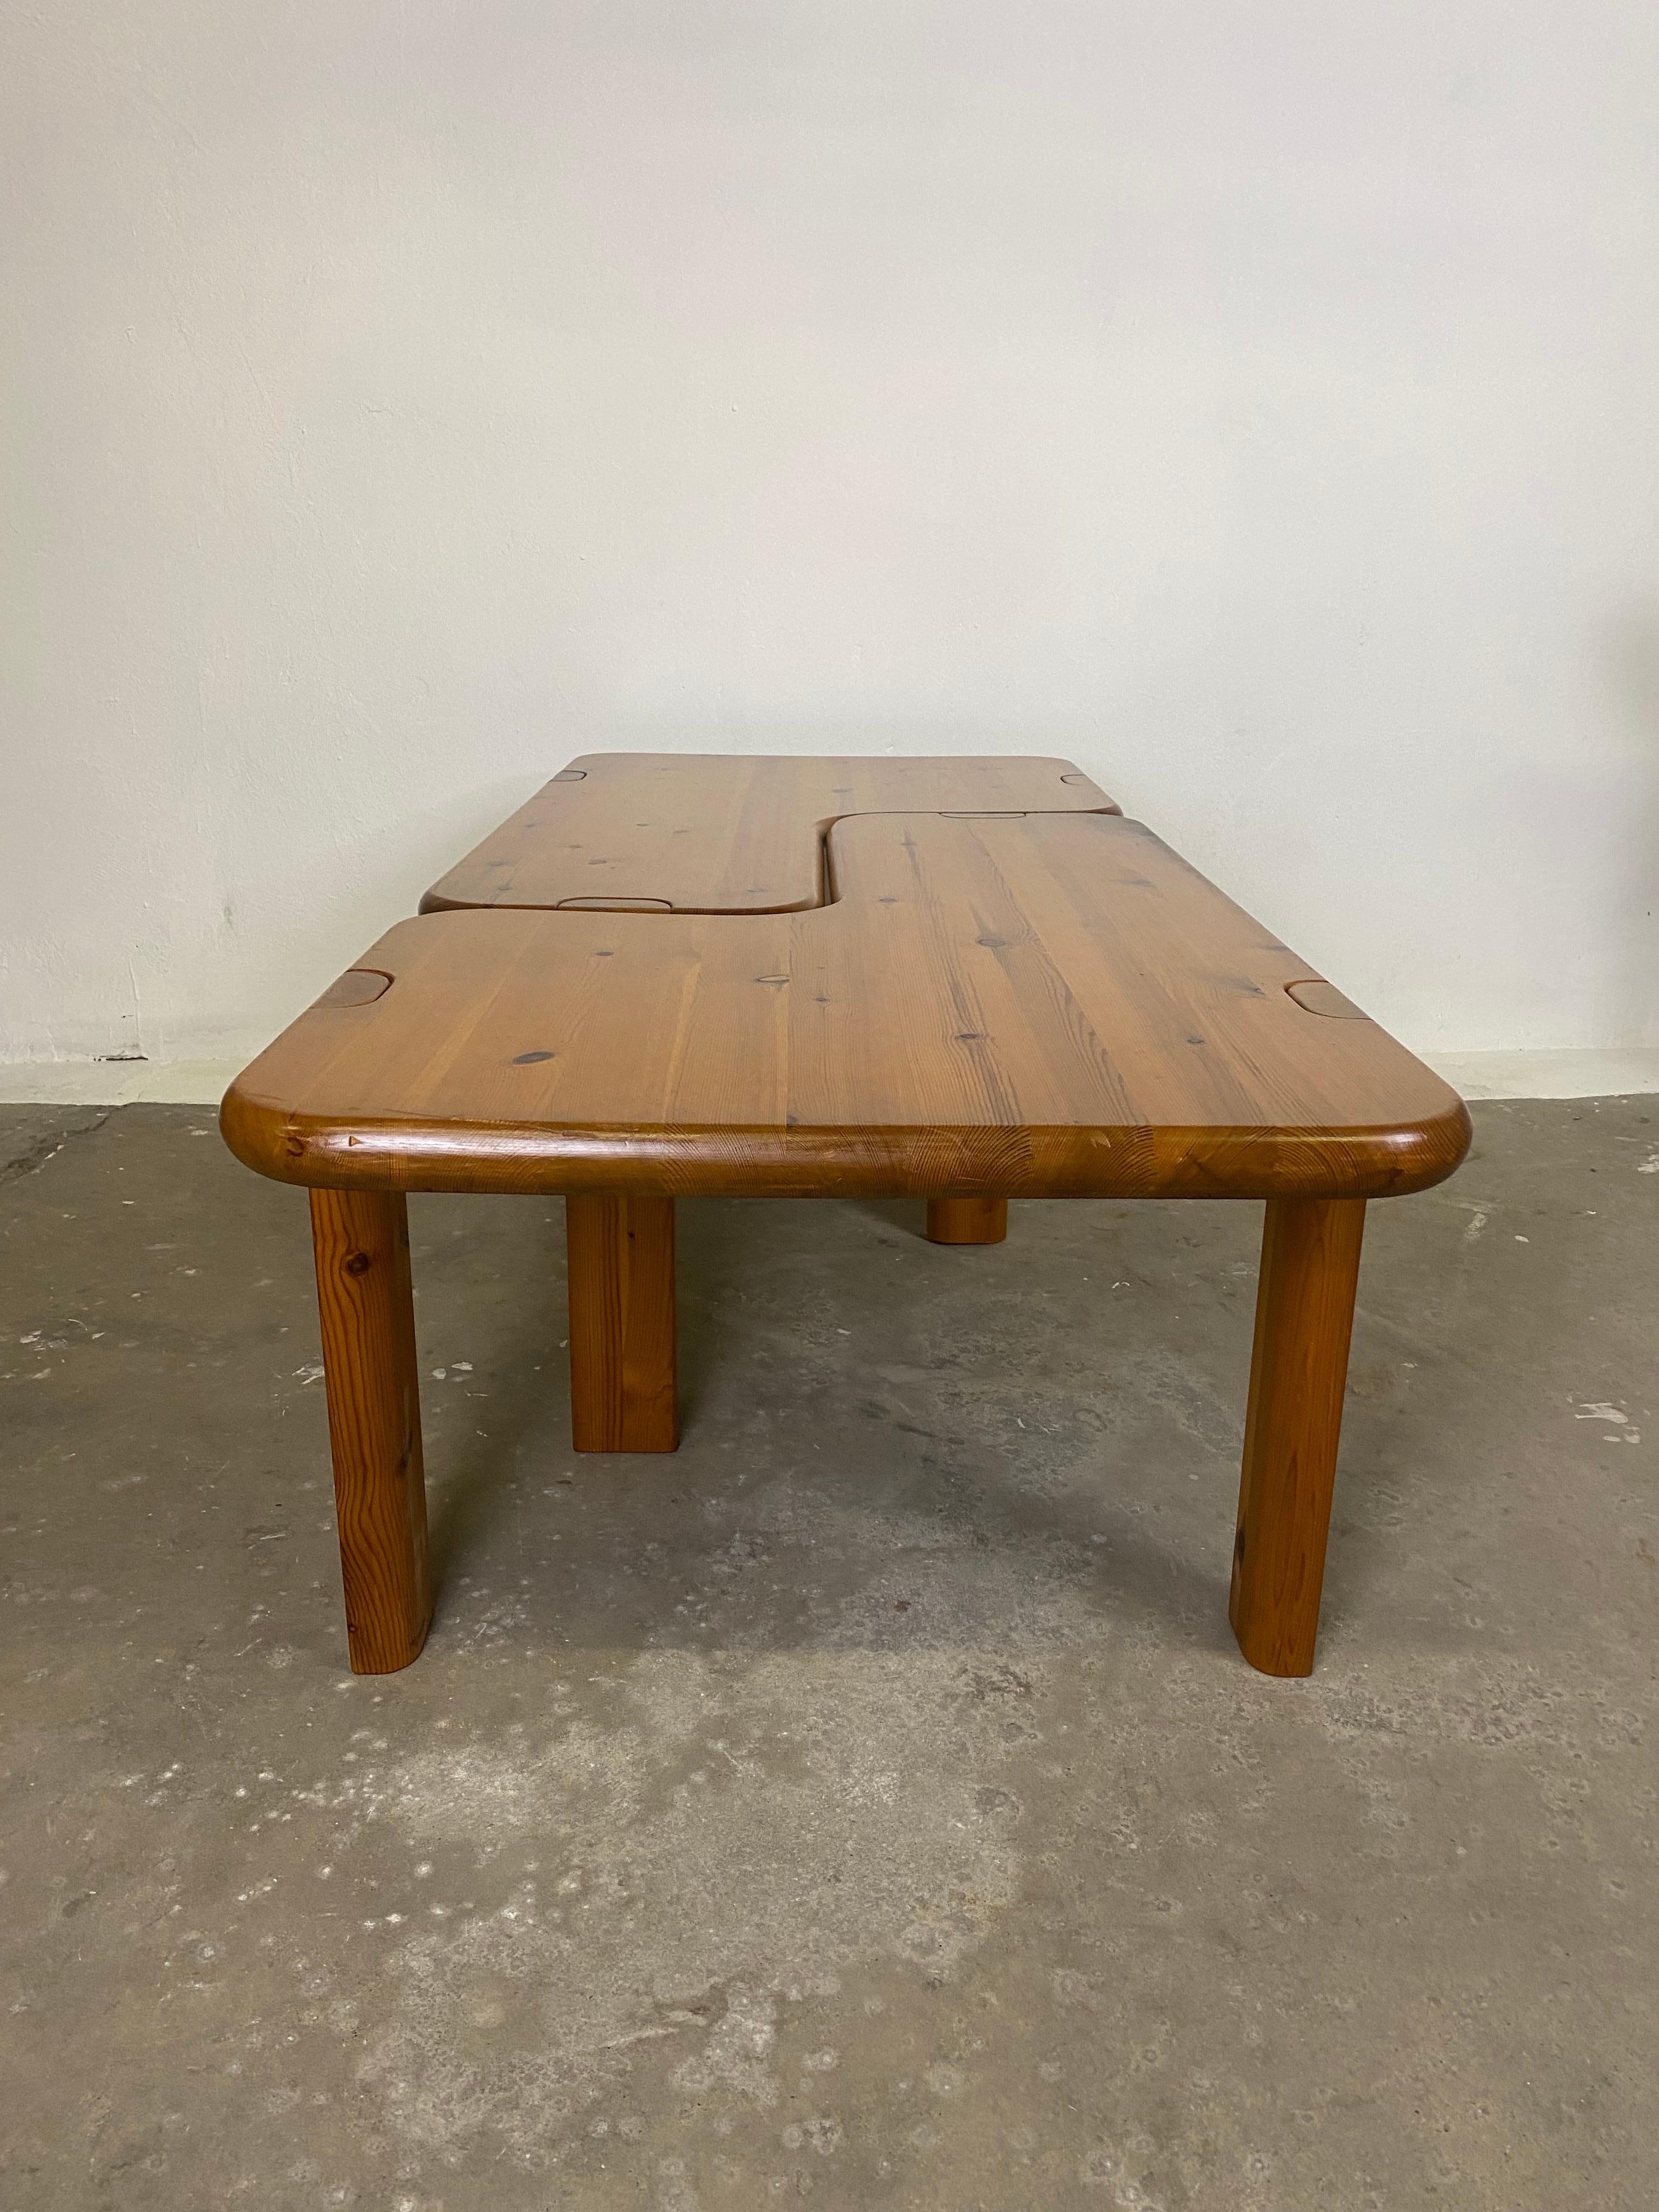 Set of 2 Midcentury Coffeetables by Aksel Kjersgaard for Odder Furniture 1970s In Good Condition For Sale In Halle, DE